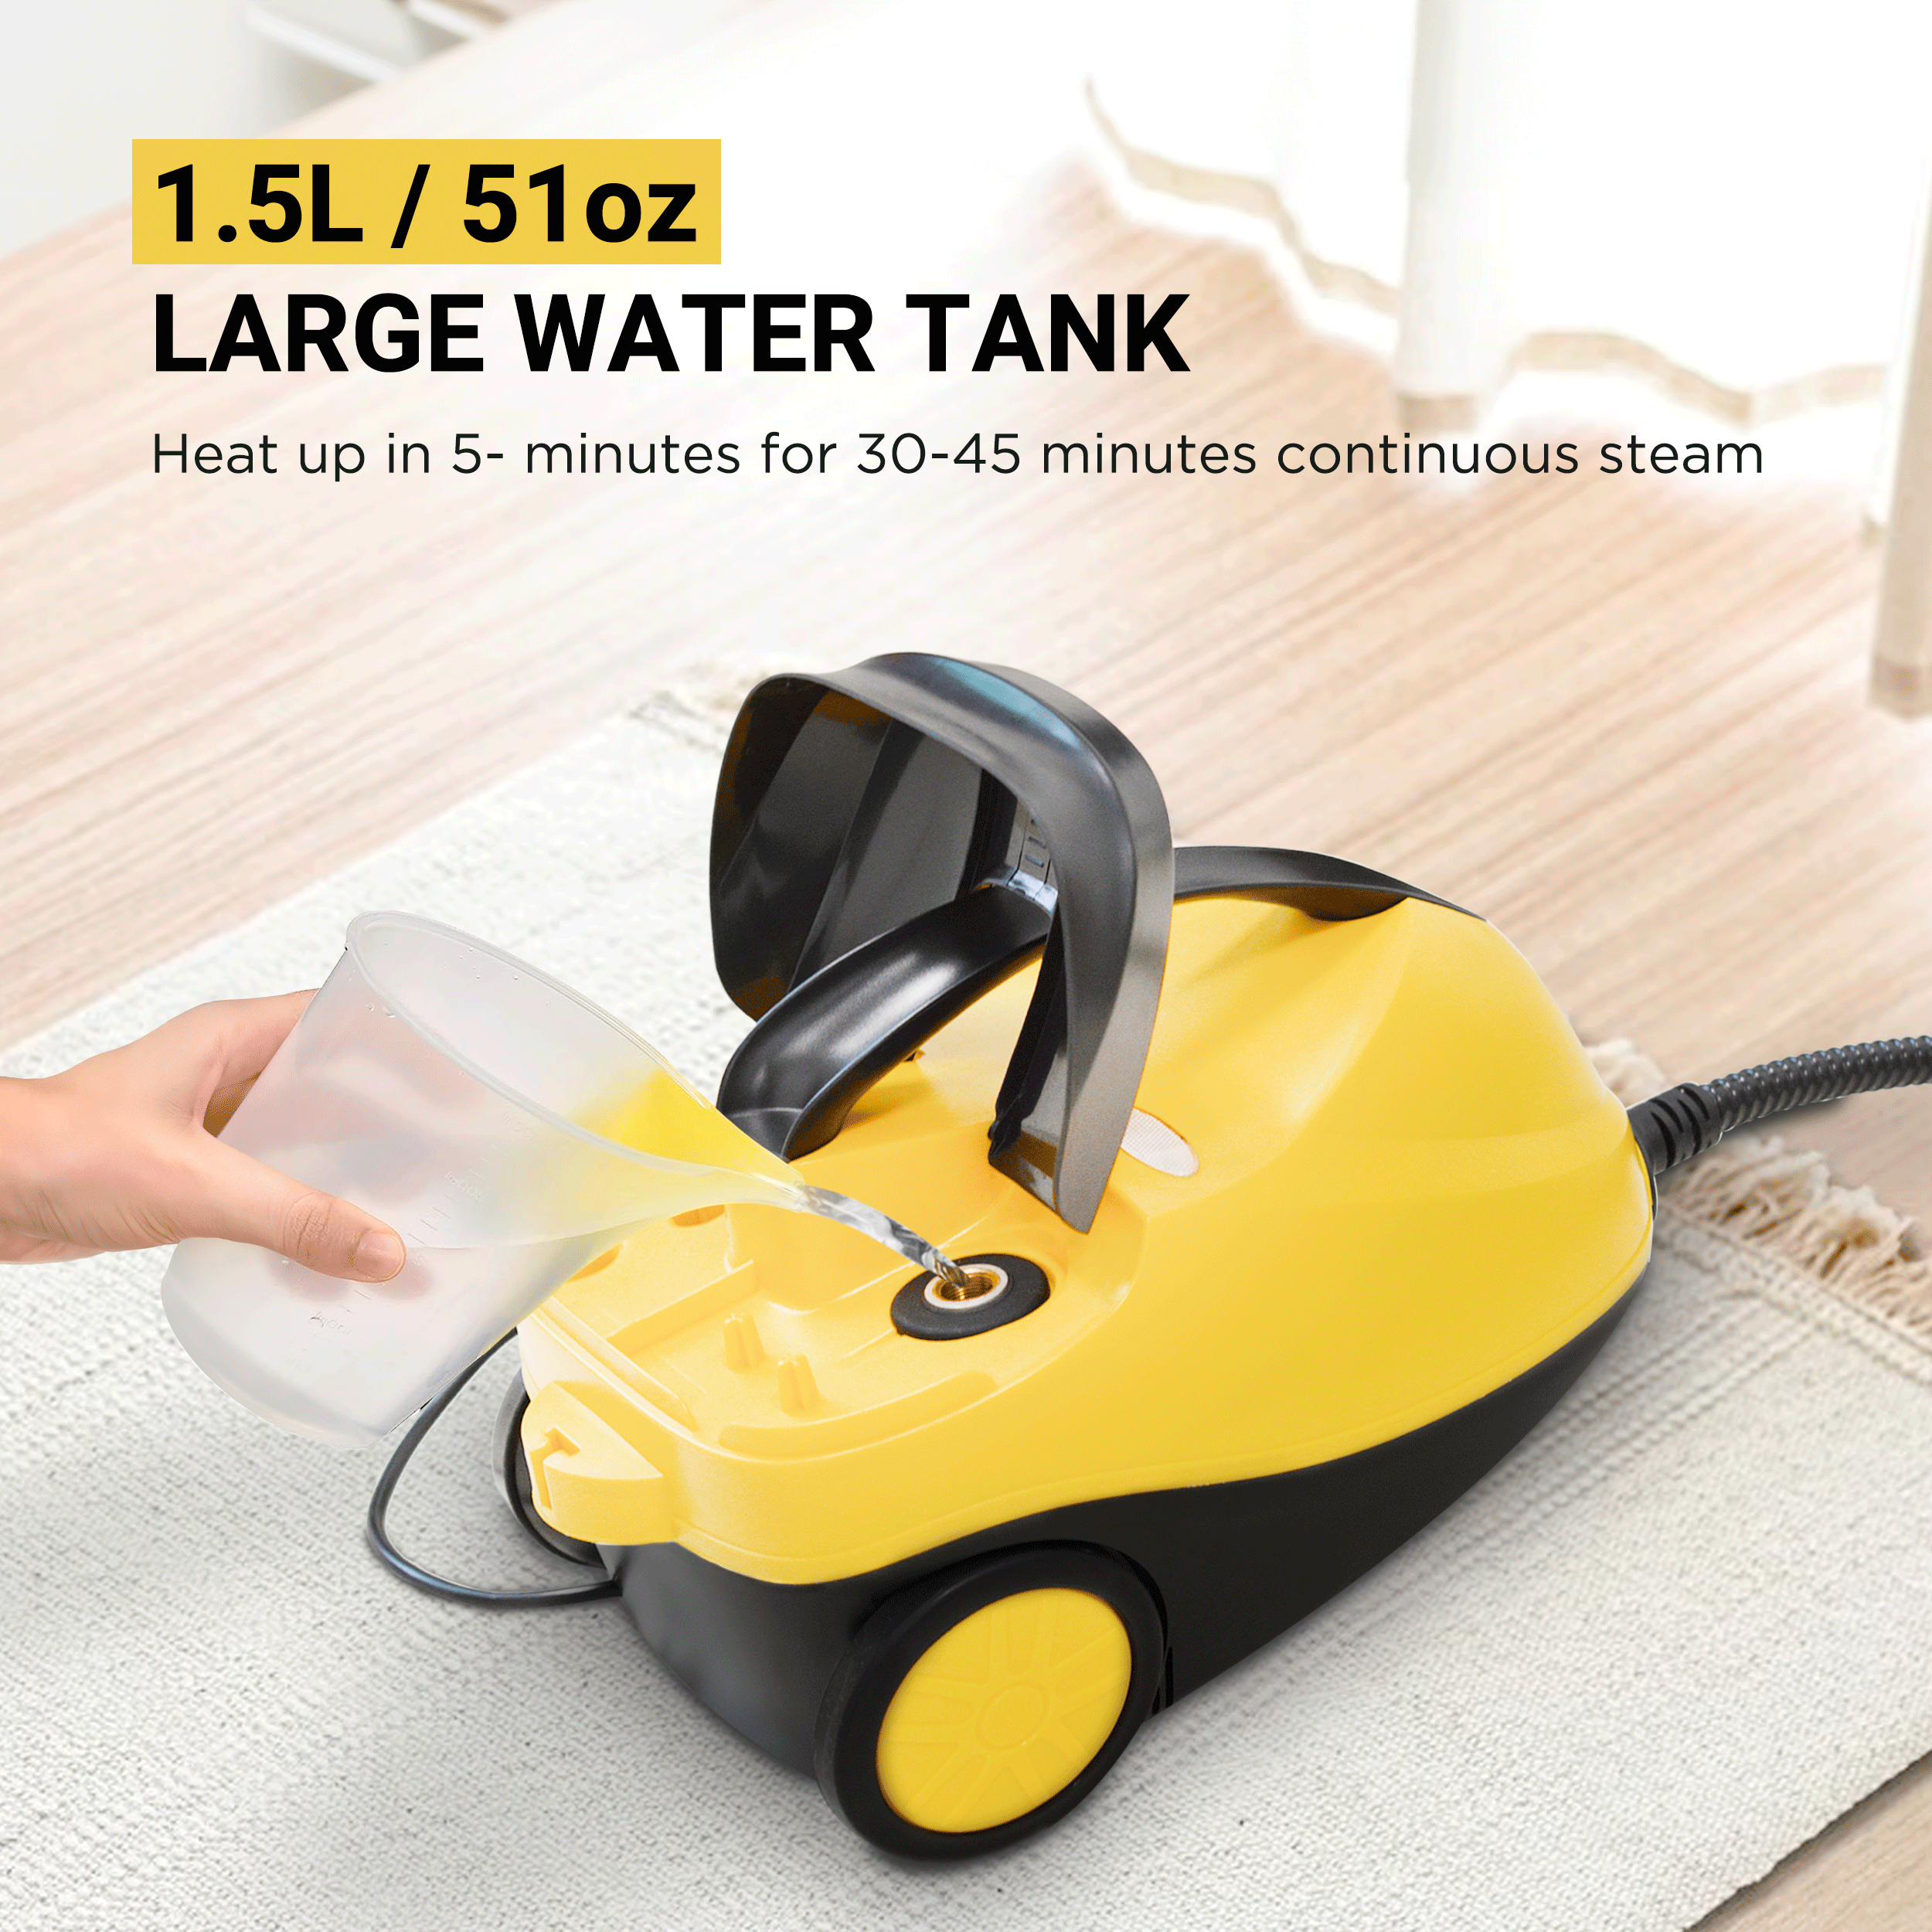 Steam Power Unleashed: Introducing the 1500W Multipurpose Steam Cleaner with 17 Piece Accessories and 1.5L Tank!